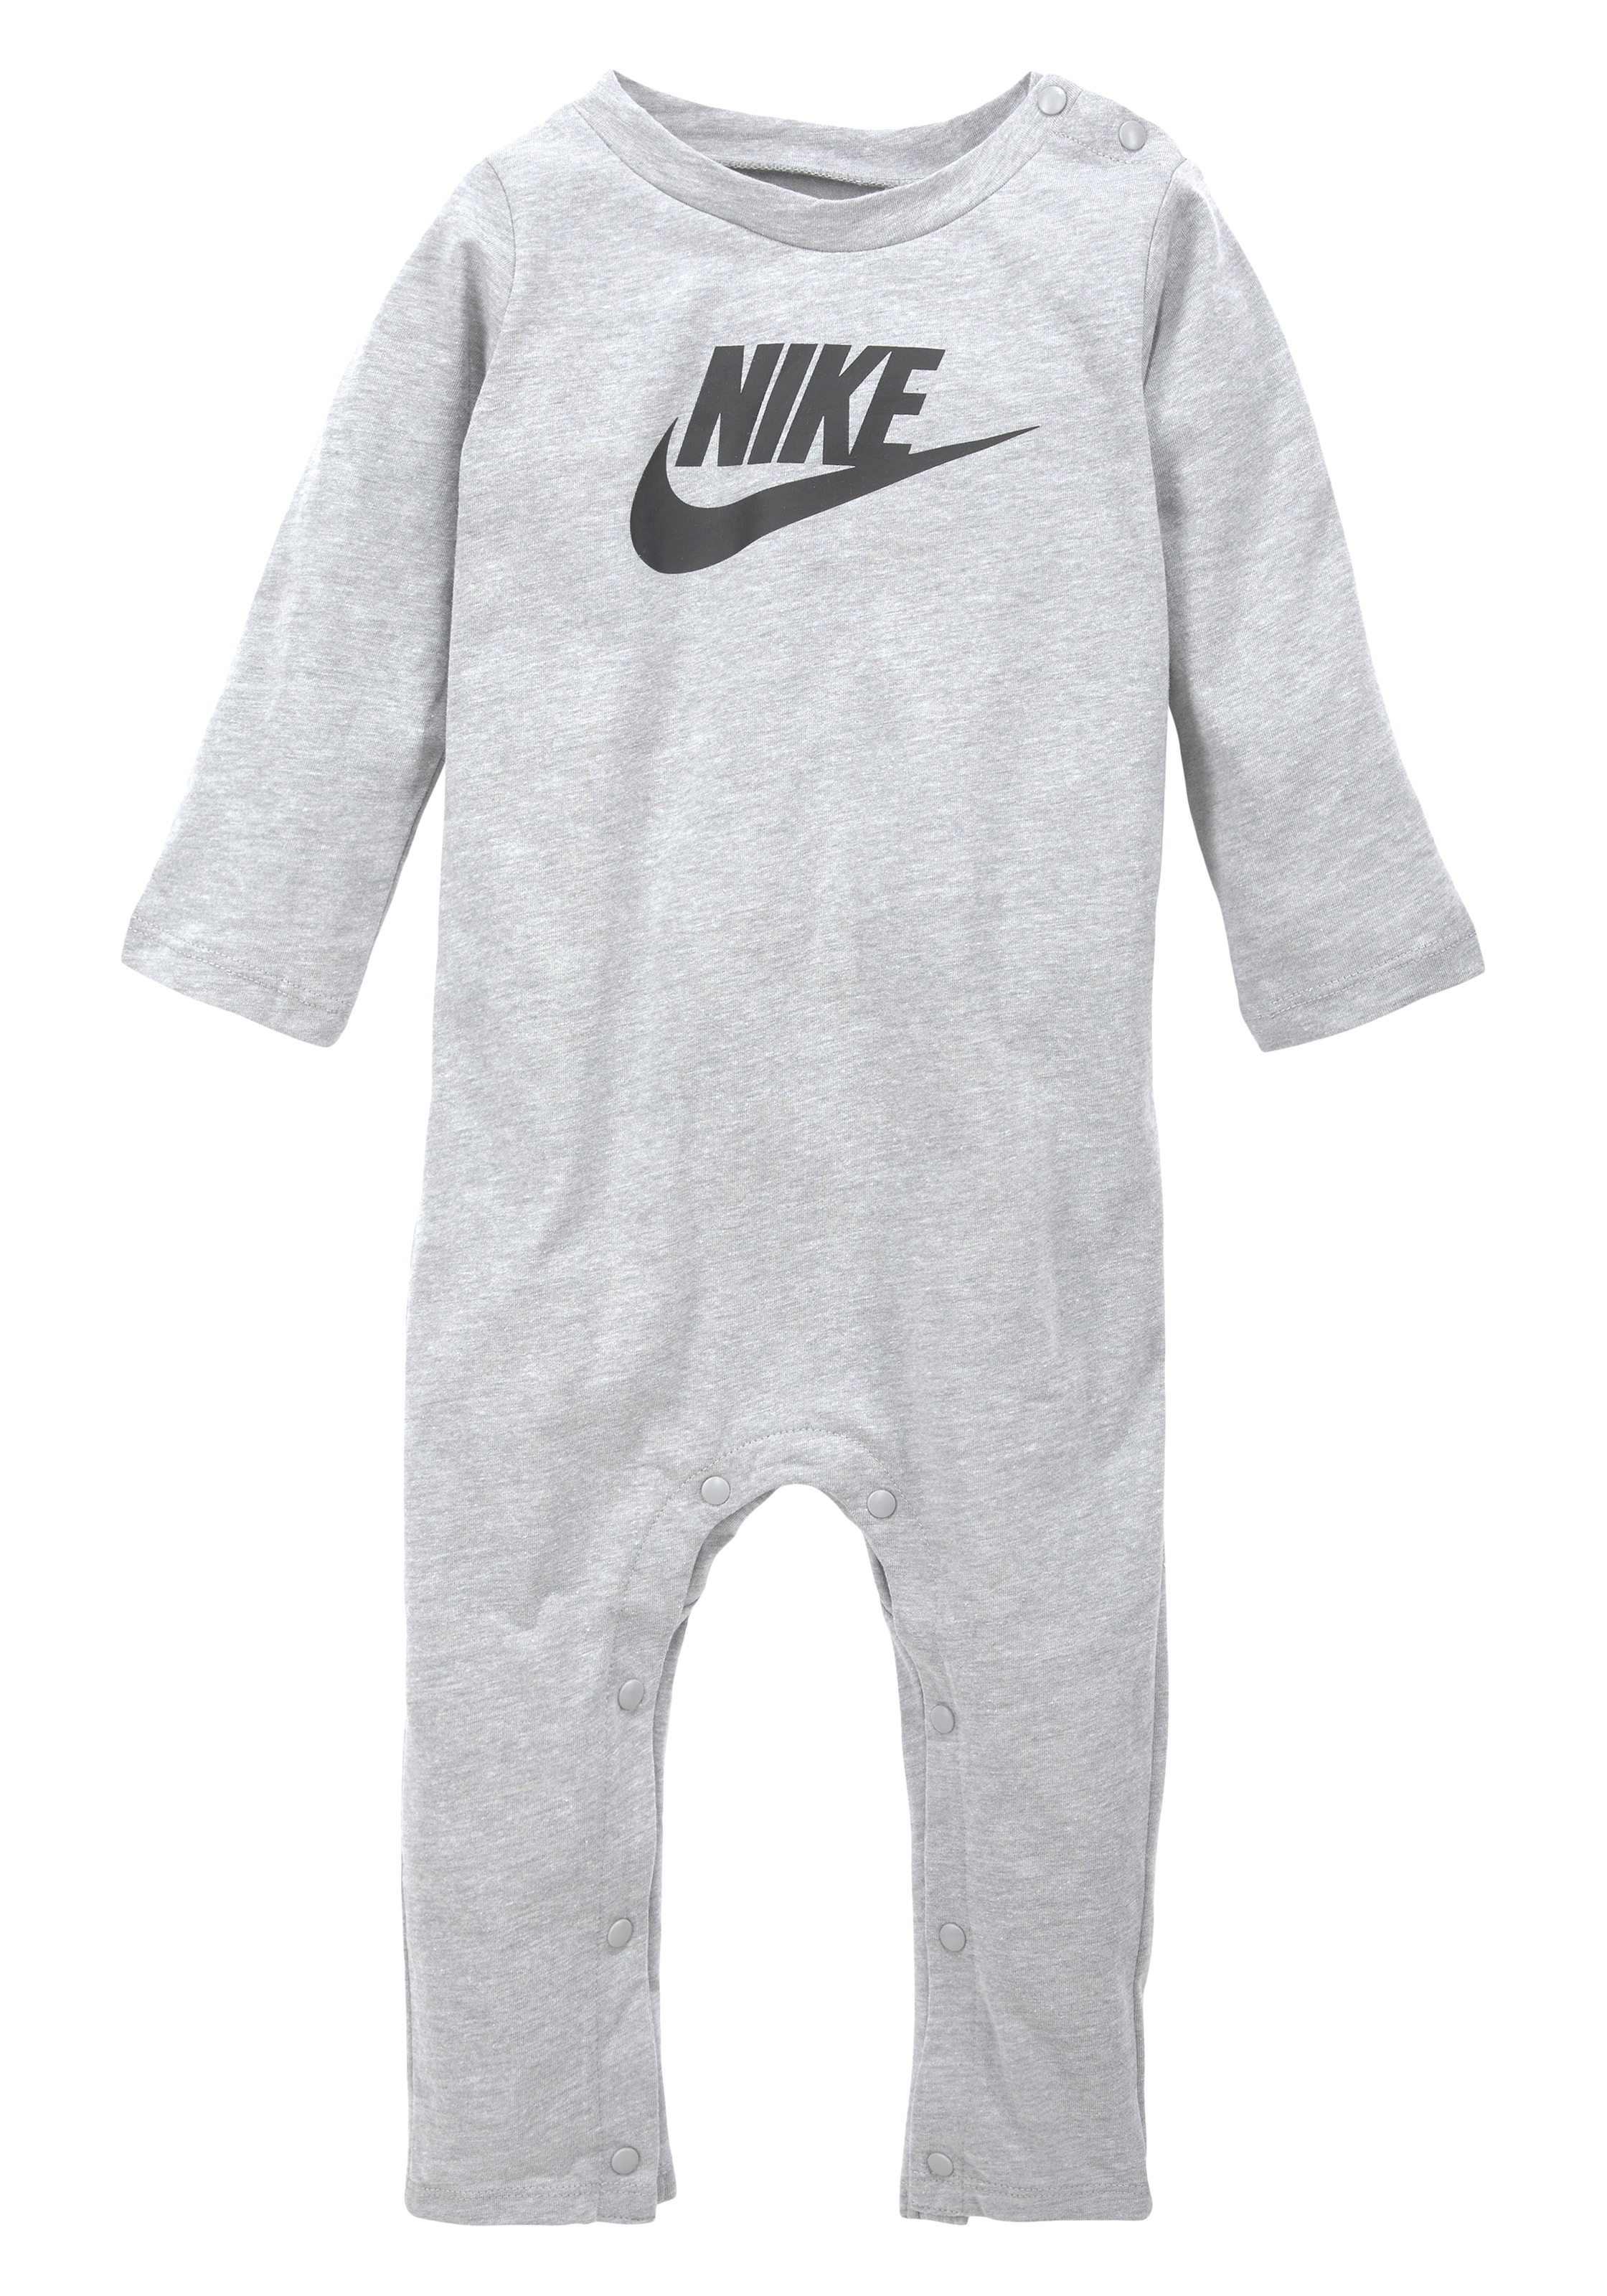 Nike bei COVERALL« Sportswear Strampler HBR online OTTO »NON-FOOTED